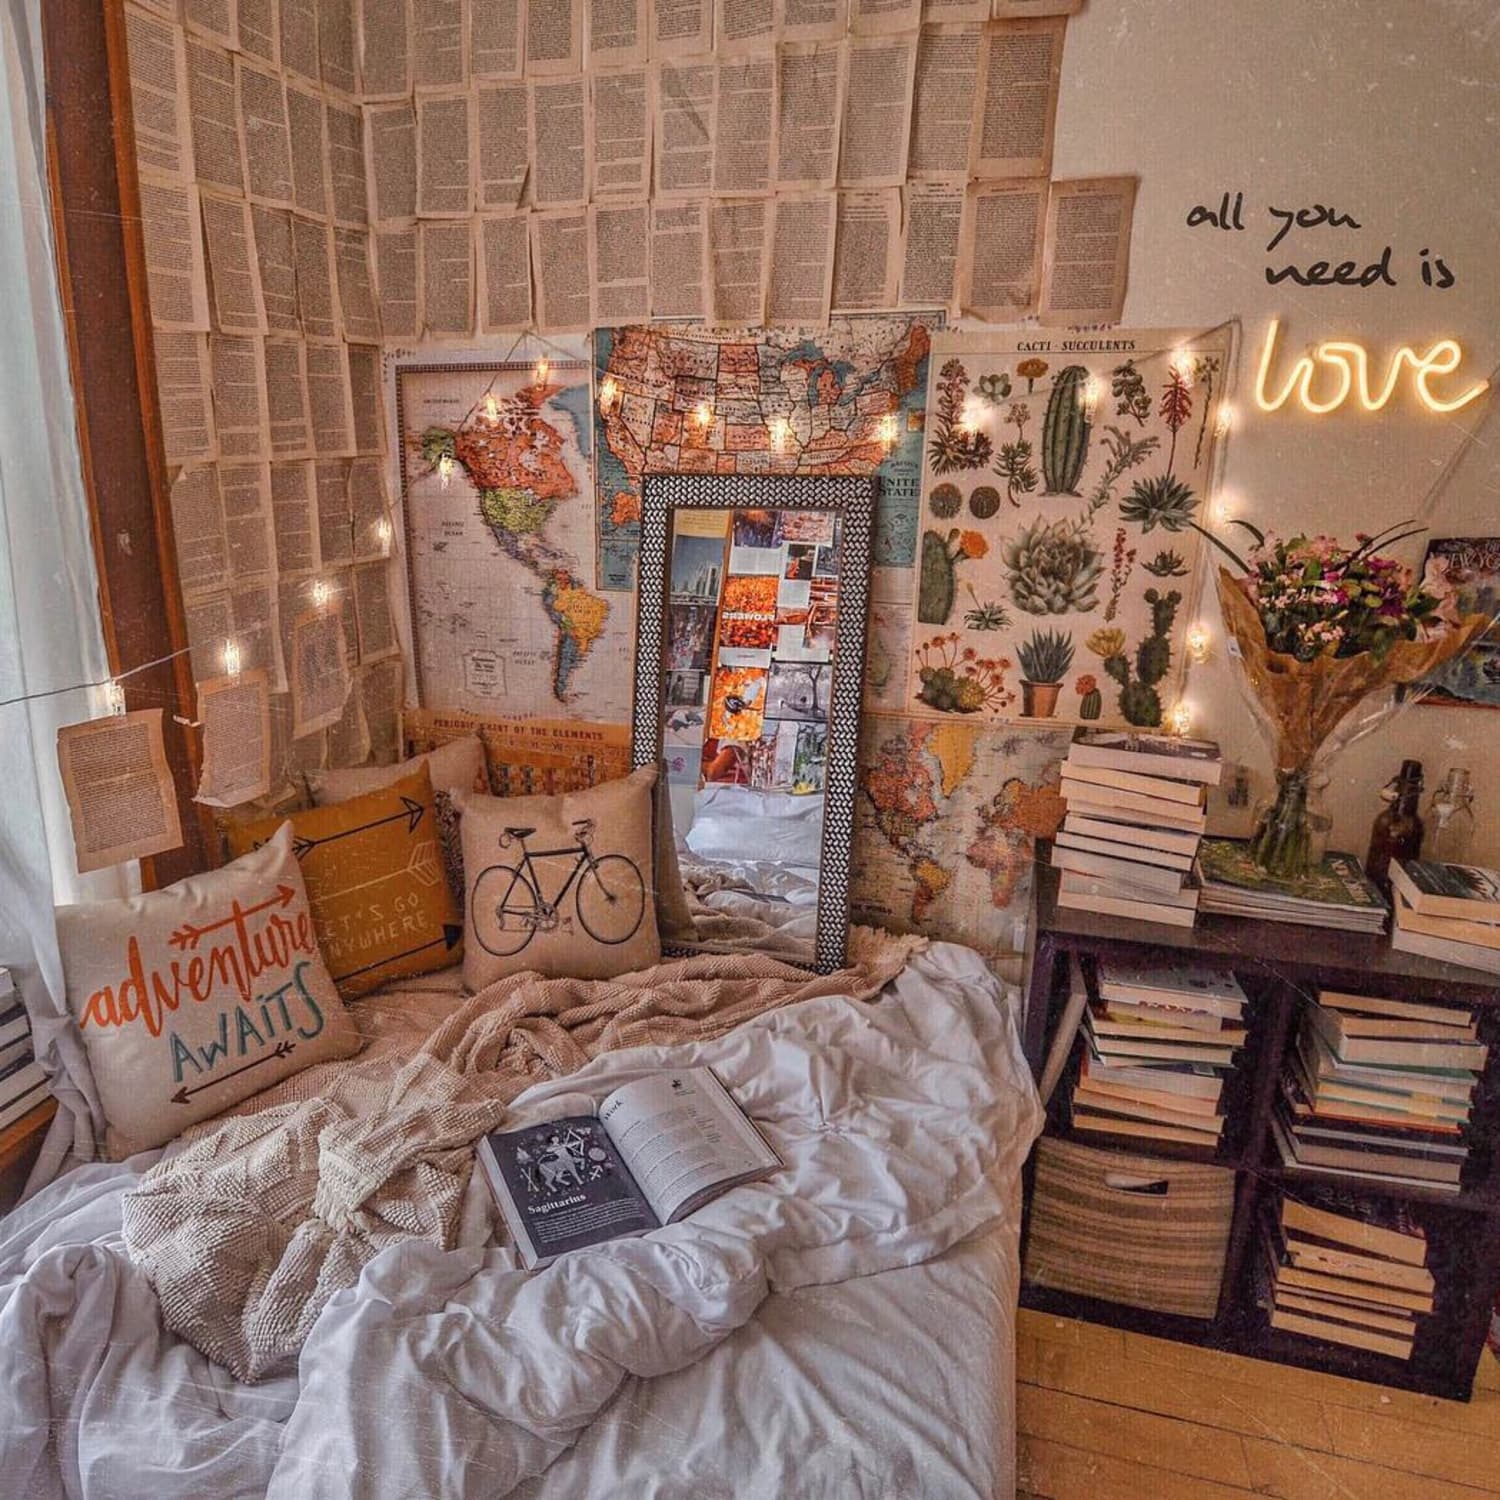 18 Incredibly Comfortable Reading Chairs Every Bookworm Needs to See